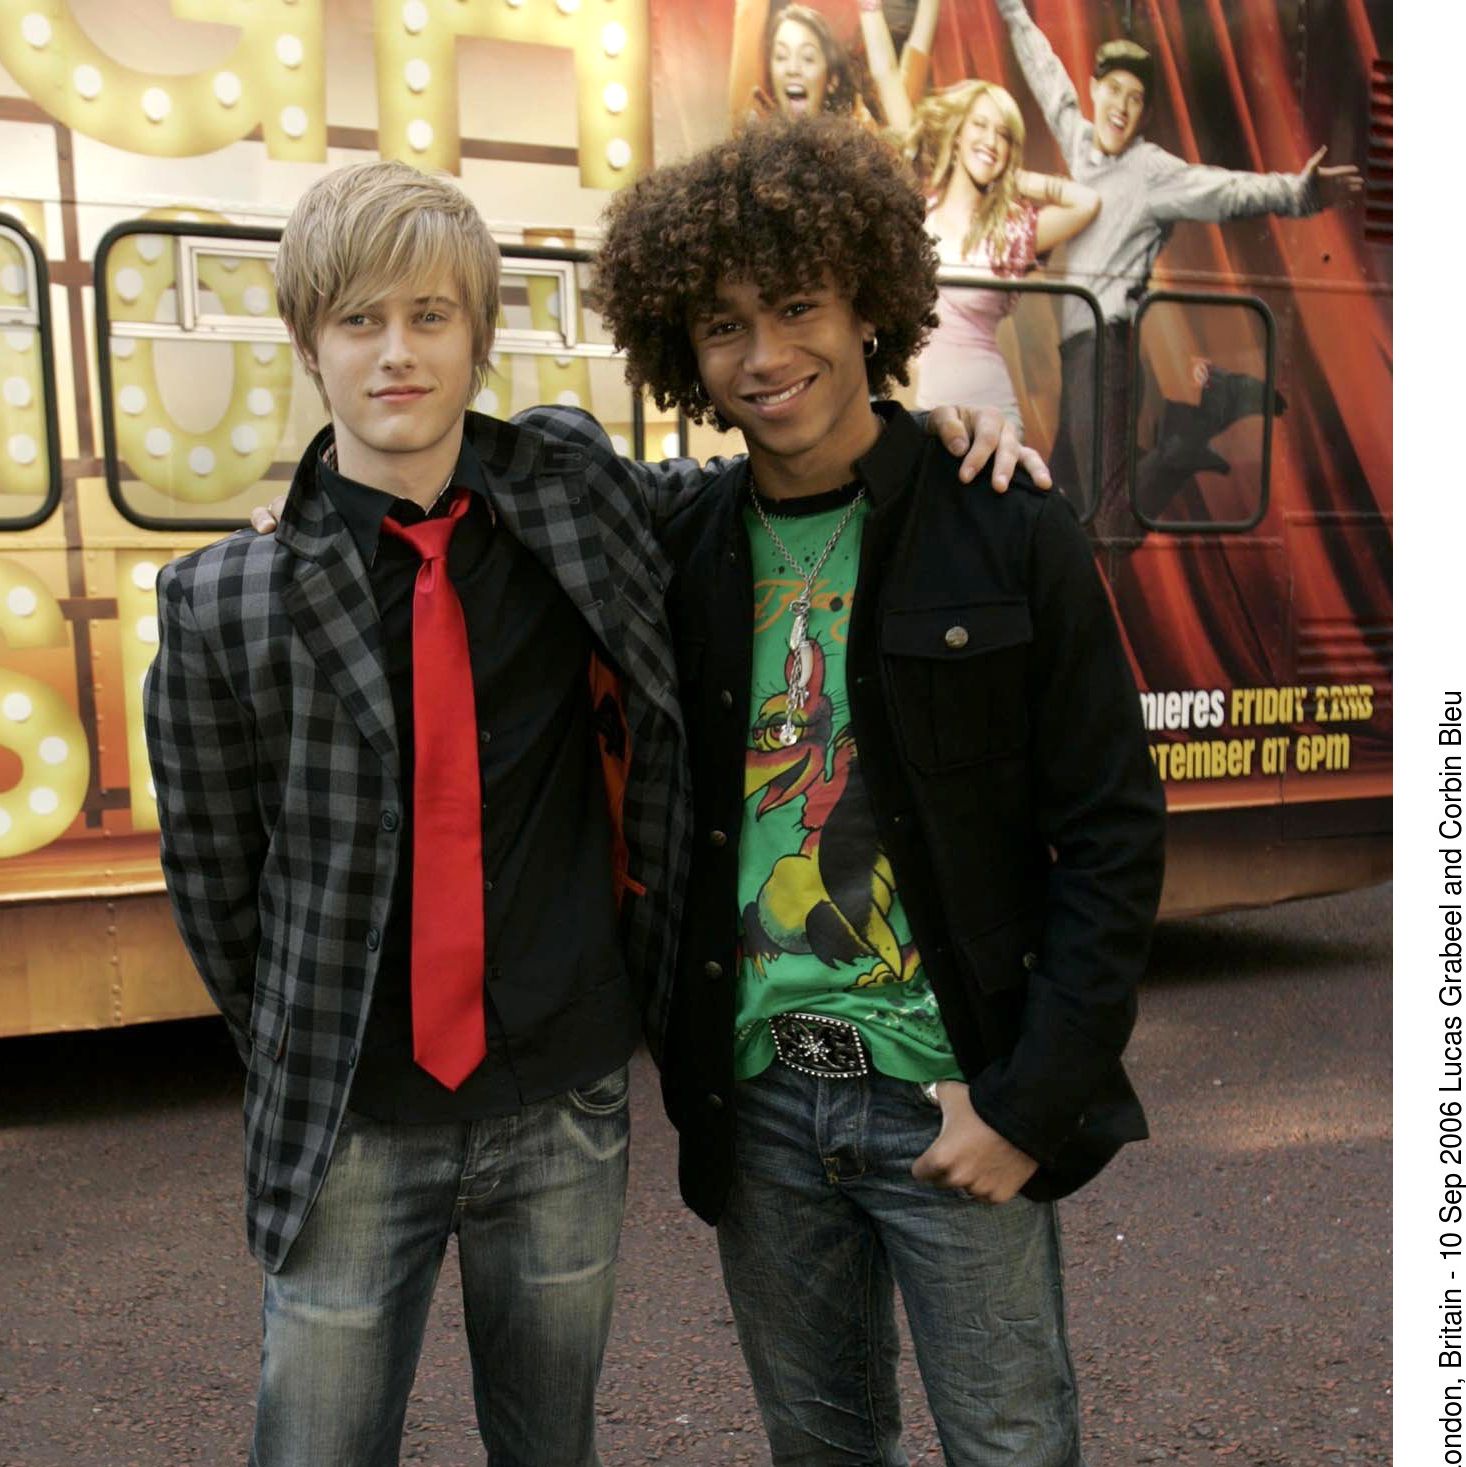 High Musical fans Chad and Ryan were